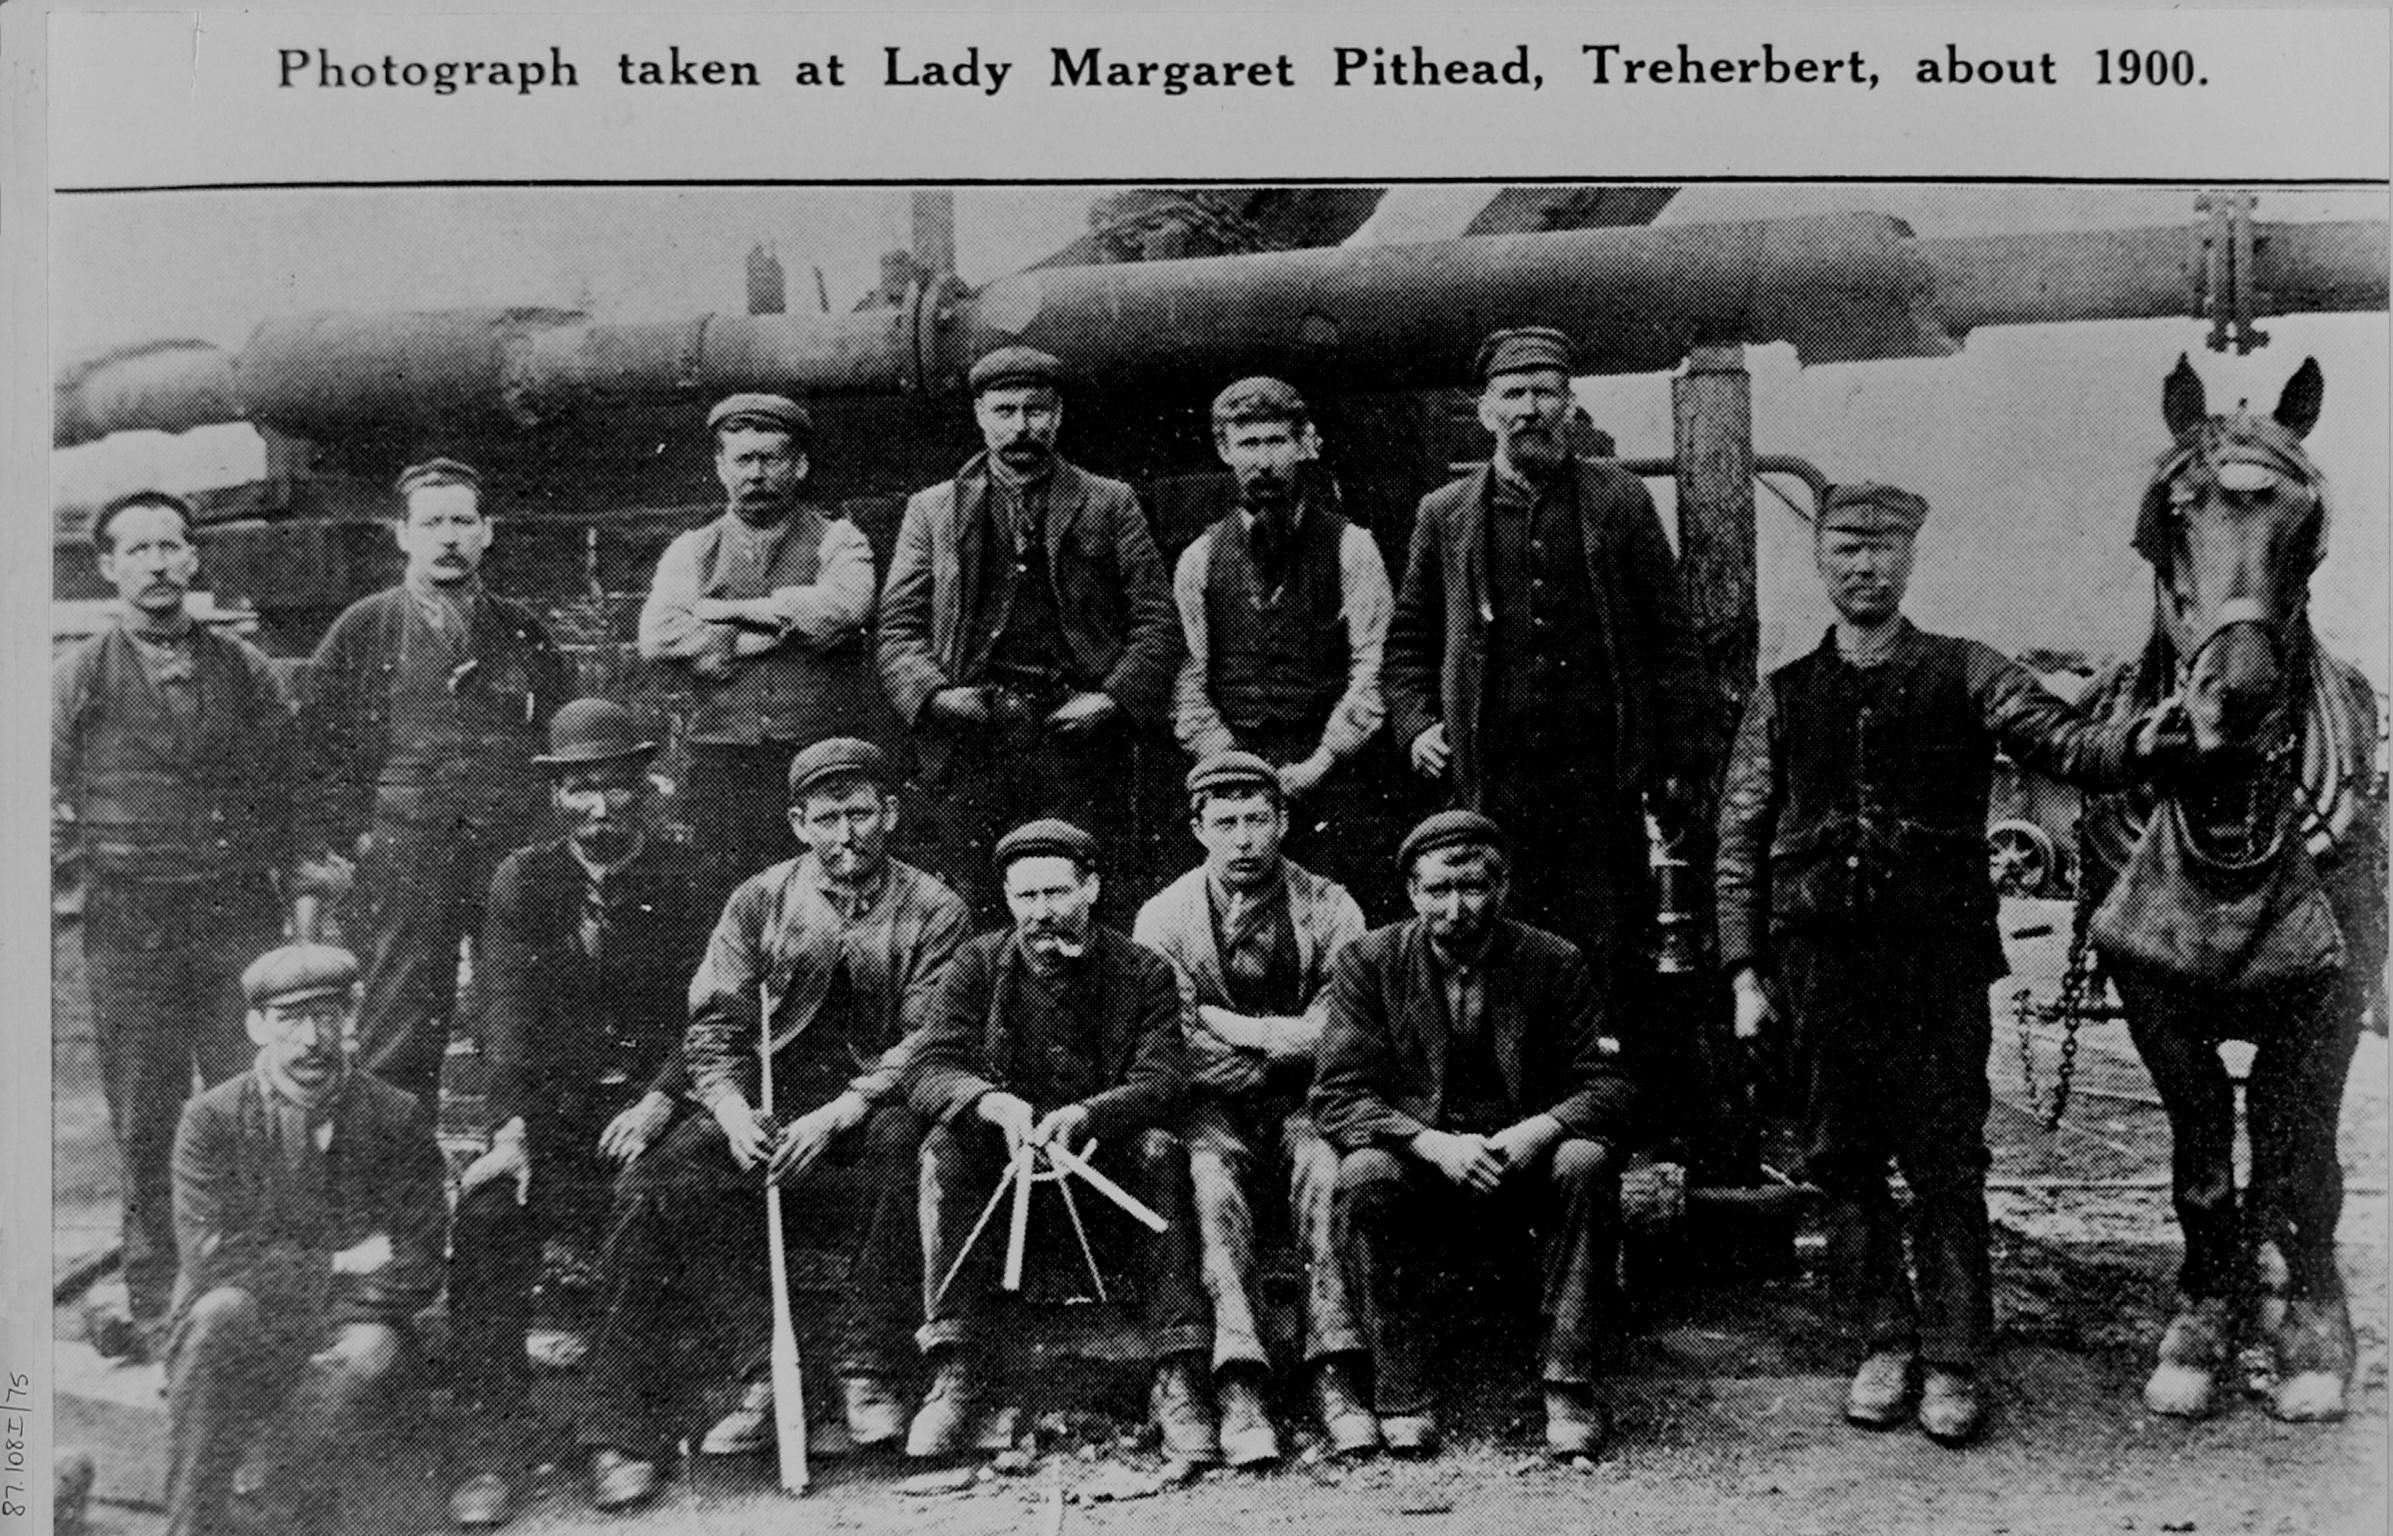 Lady Margaret Colliery, photograph